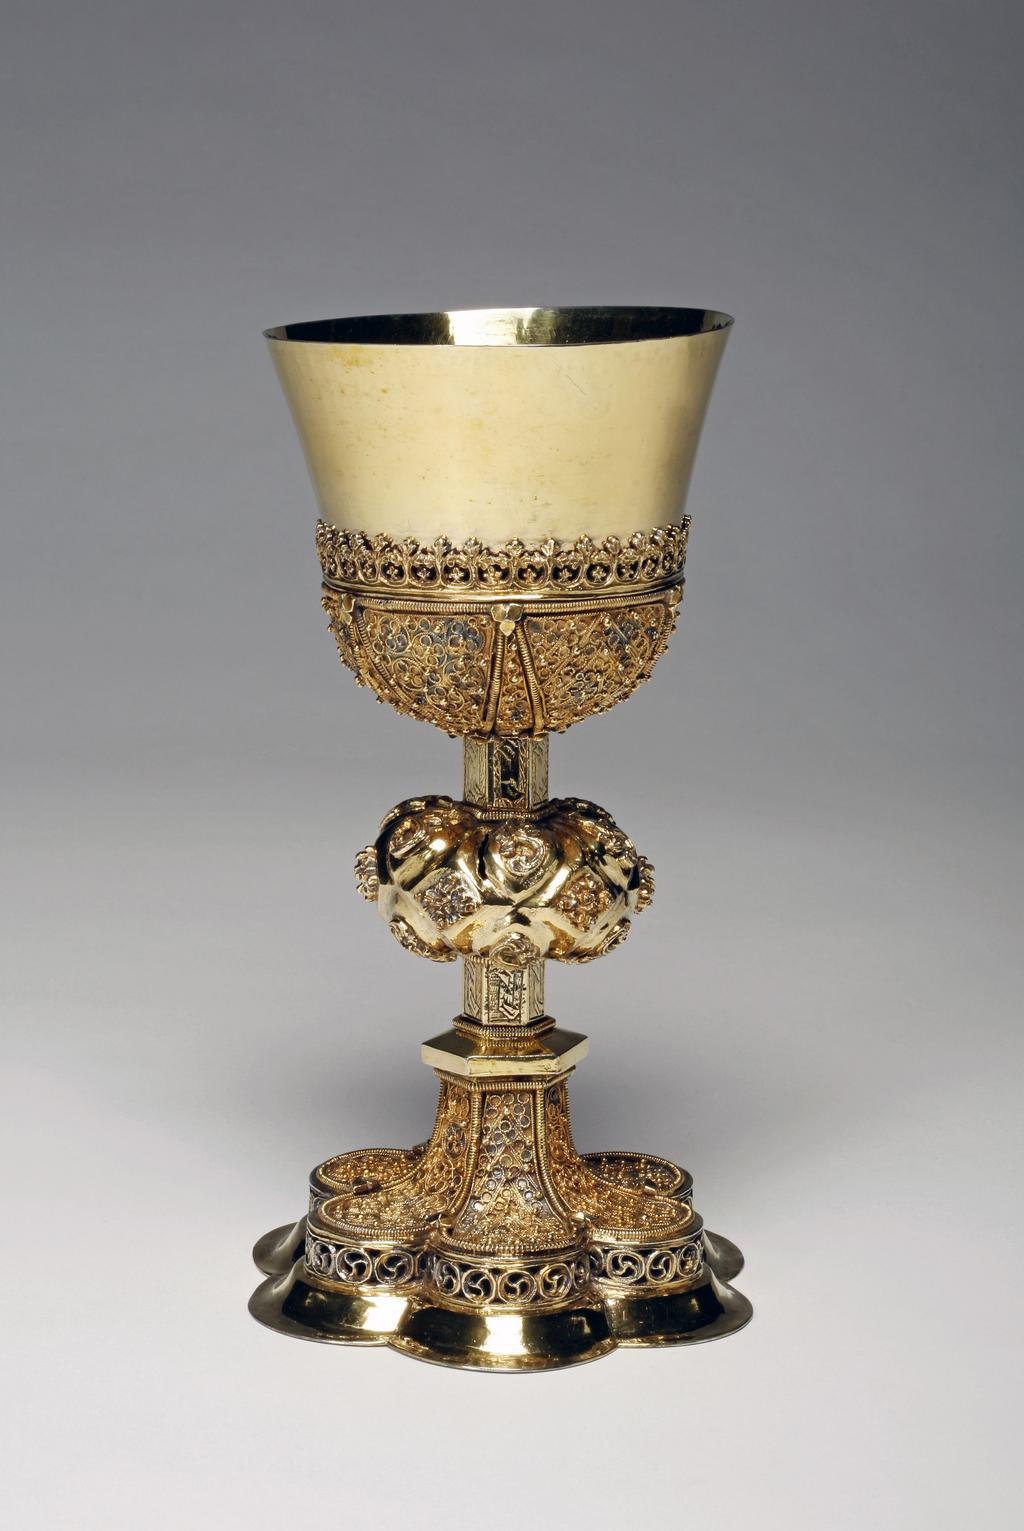 An image of Chalice. Unknown silversmith, Transylvania. Decorated with engraved, embossed, pierced, cast and filigree ornament. The base sits on a plain spreading hexafoil ring, above which is a verticle openwork border of cast scrolls. The trumpet-shaped foot is divided into six panels by ropework borders which contain applied filigree work. The hexagonal stem is engraved with a geometric pattern. At the centre is a large lobed knop with applied scrolls and flowerheads. The base of the plain U-shaped cup is held by triangular panels of filigree work, above which is a girdle of fleur-de-lys. Silver-gilt, raised, cast, applied, pierced and engraved, height, to rim, 20.7 cm, width, base, 11.7 cm, diameter, rim, 10.2 cm, weight 491 g, circa 1500-1550. Late Medieval.